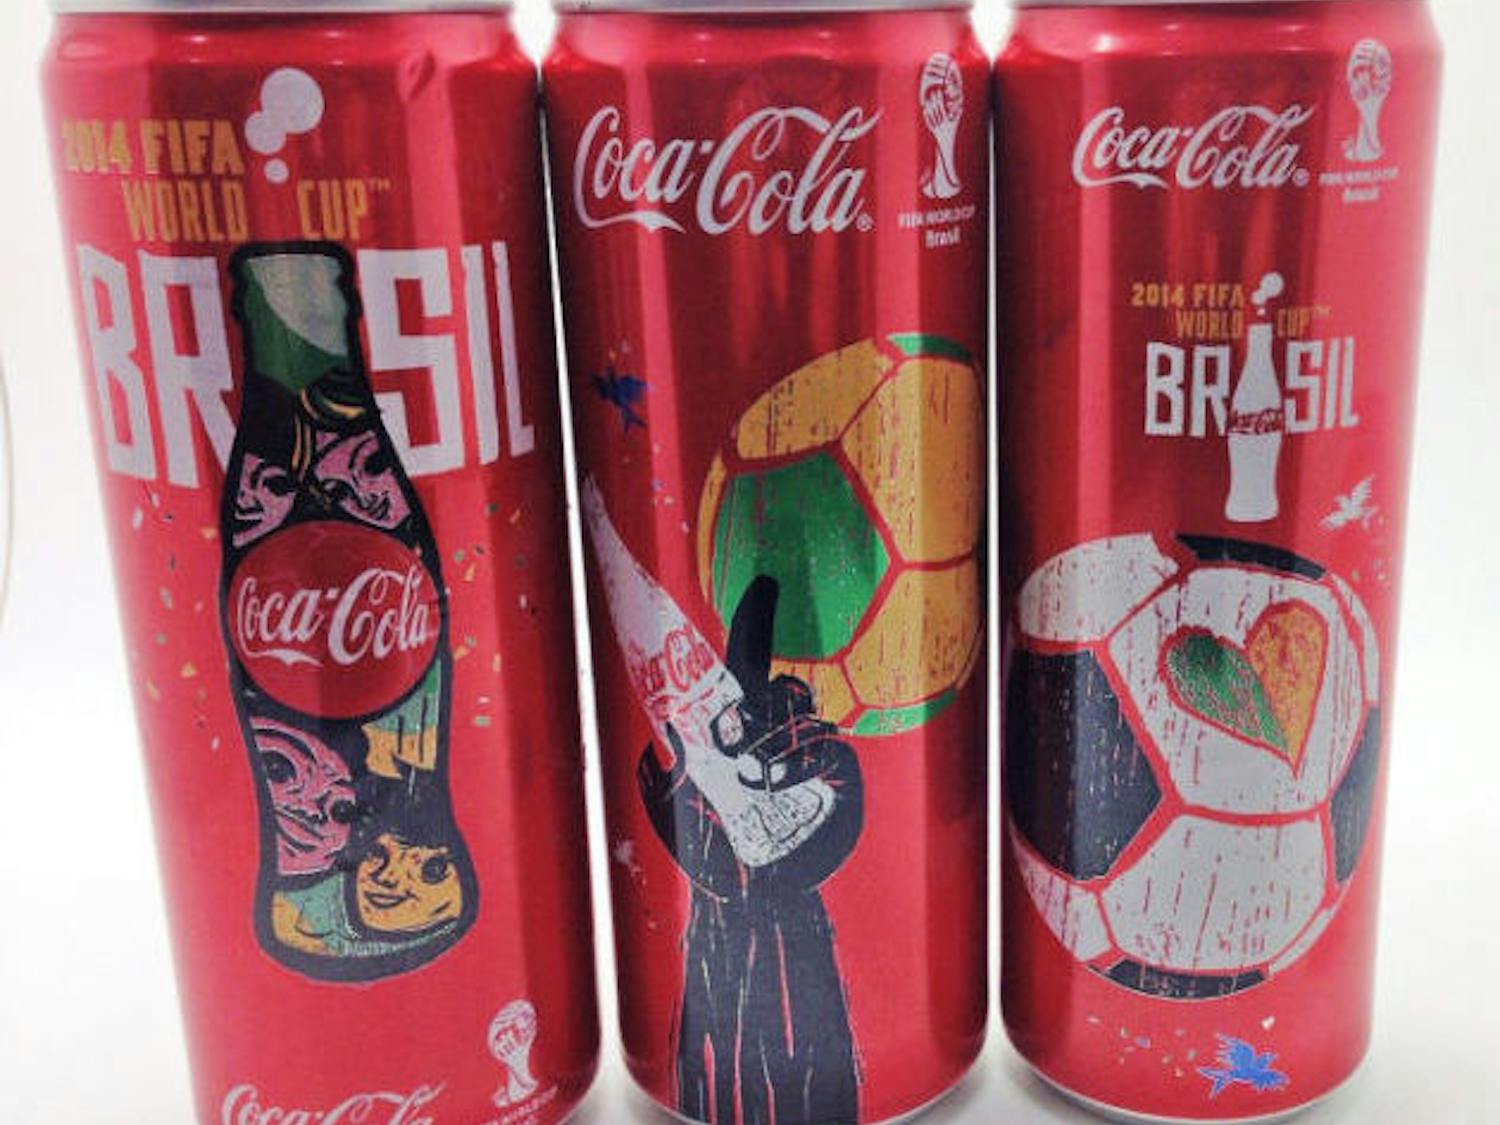 "2014 FIFA World Cup BRASIL 355 ml Coca-Cola UAE and Oman" by José Roitberg, used under CC BY-NC-ND 2.0